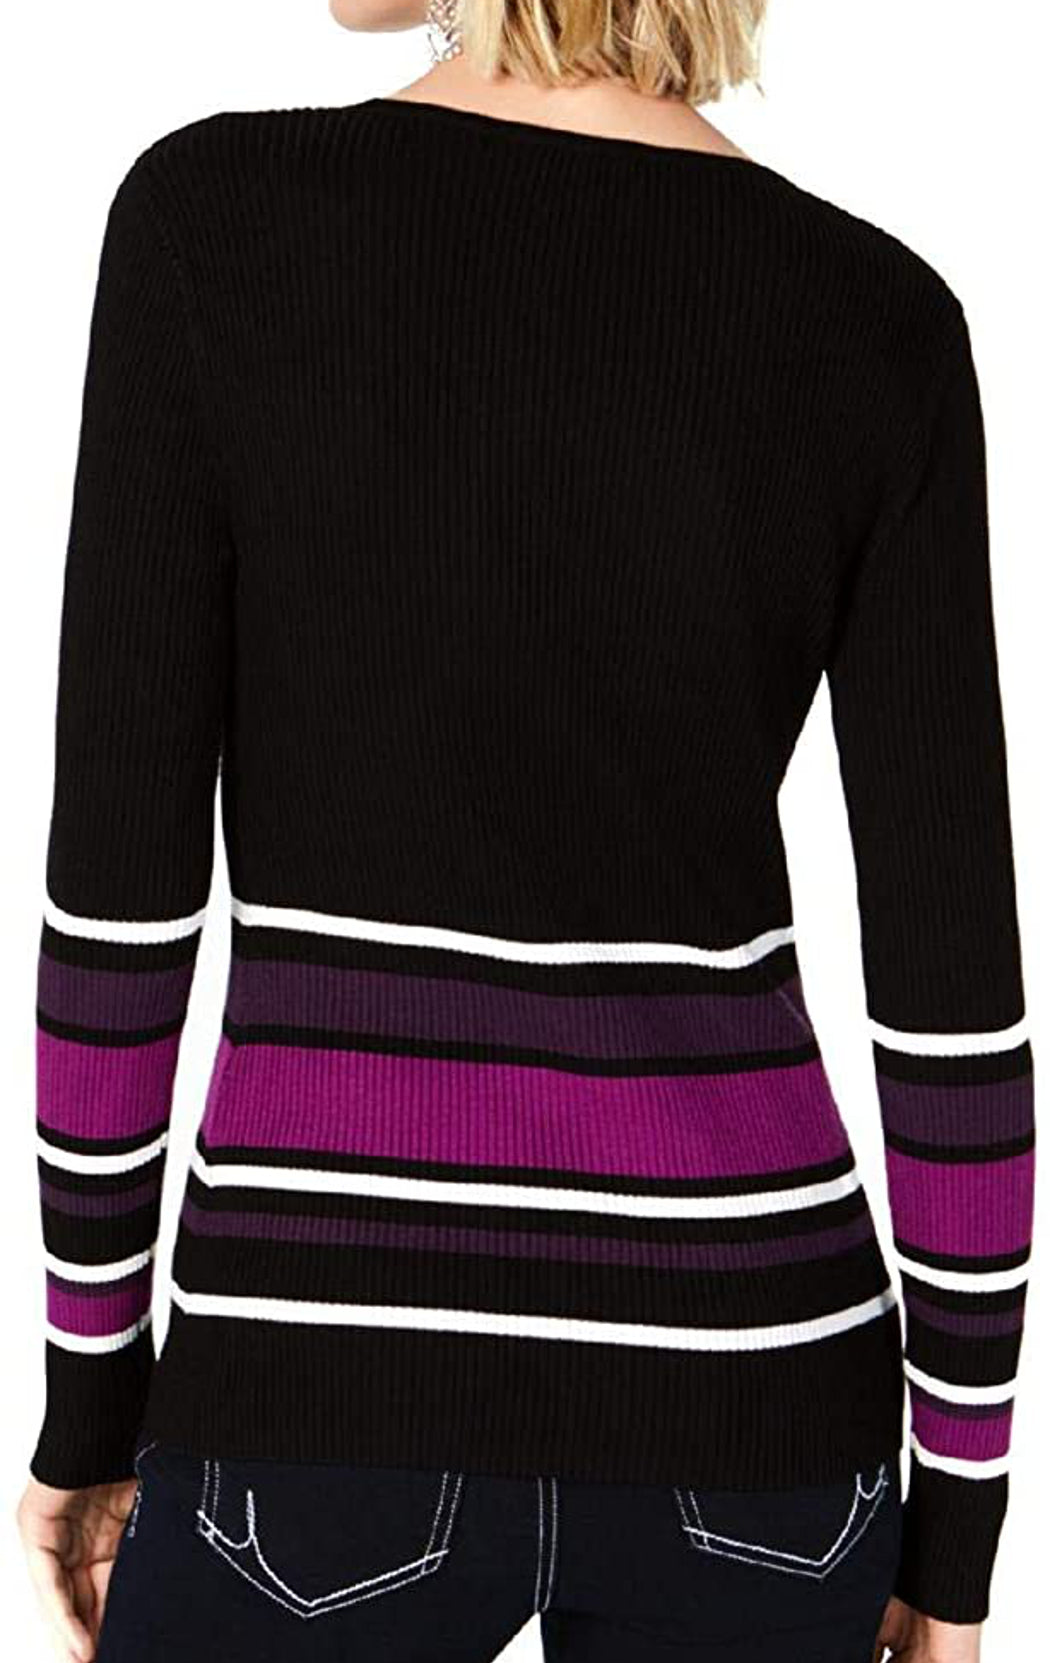 Inc International Concepts Womens Striped Cut Out Sweater